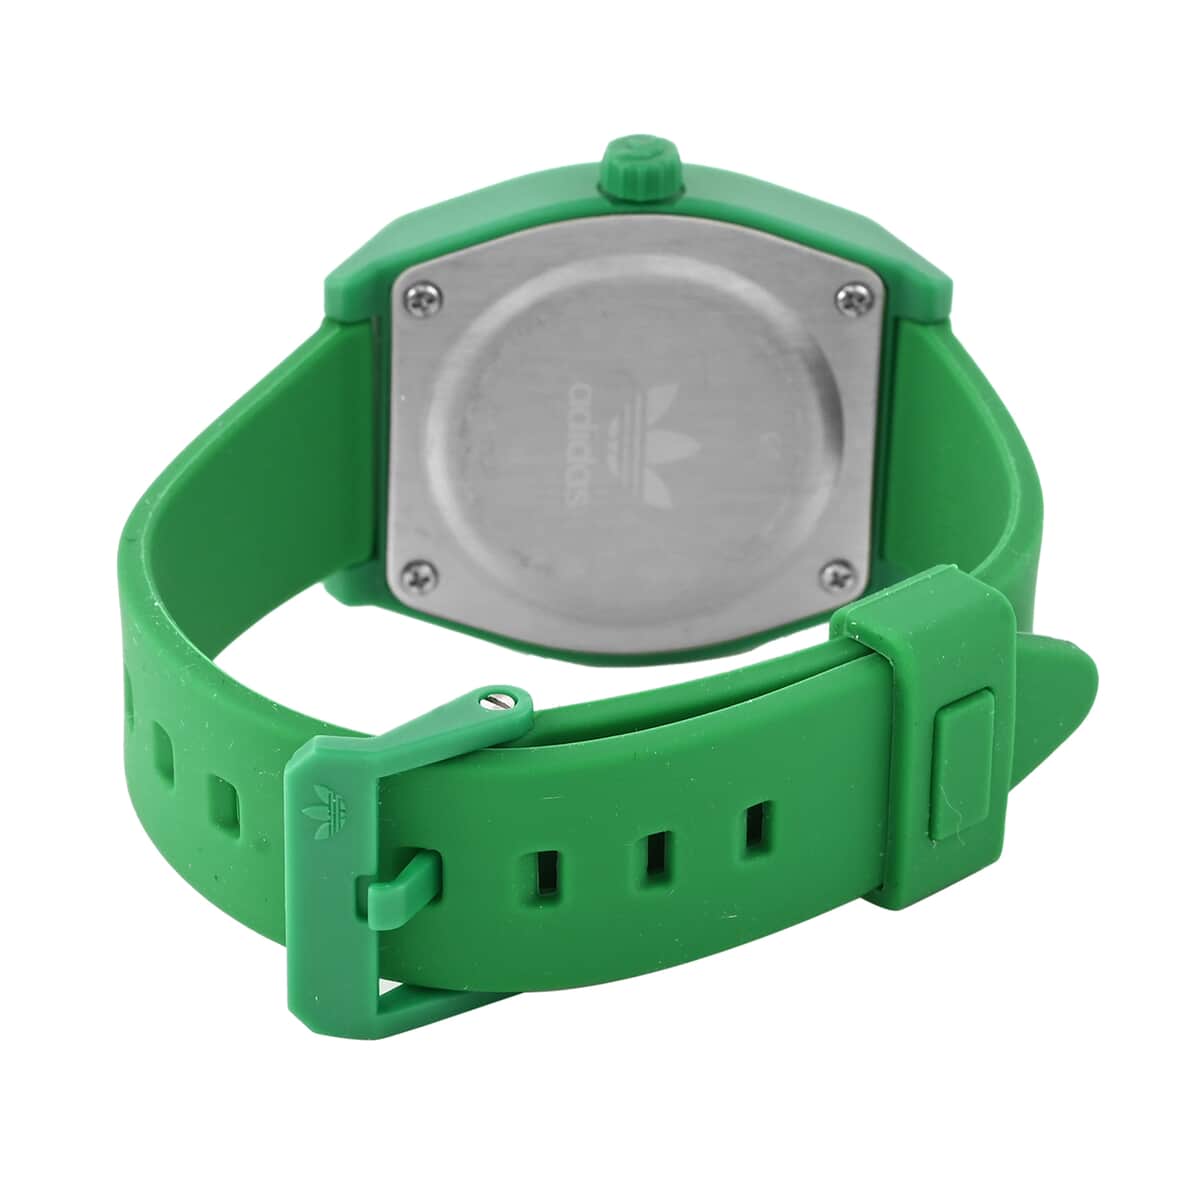 ADIDAS Process SP1 Japanese Quartz Movement Silicone Strap Watch in Green (38mm) image number 2